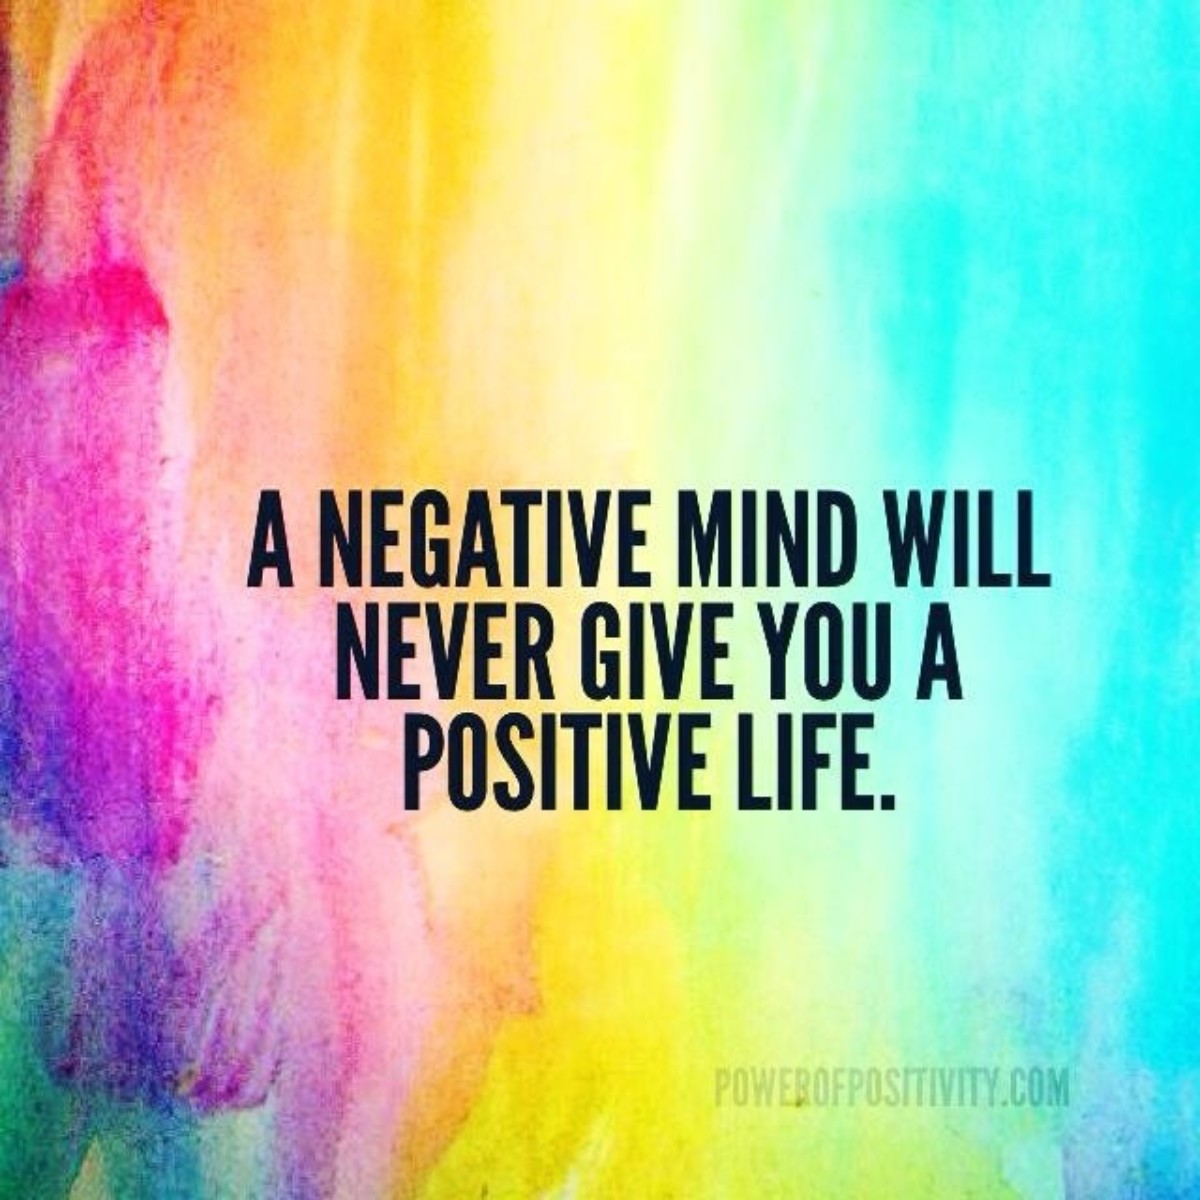 Be ways life to positive in How to